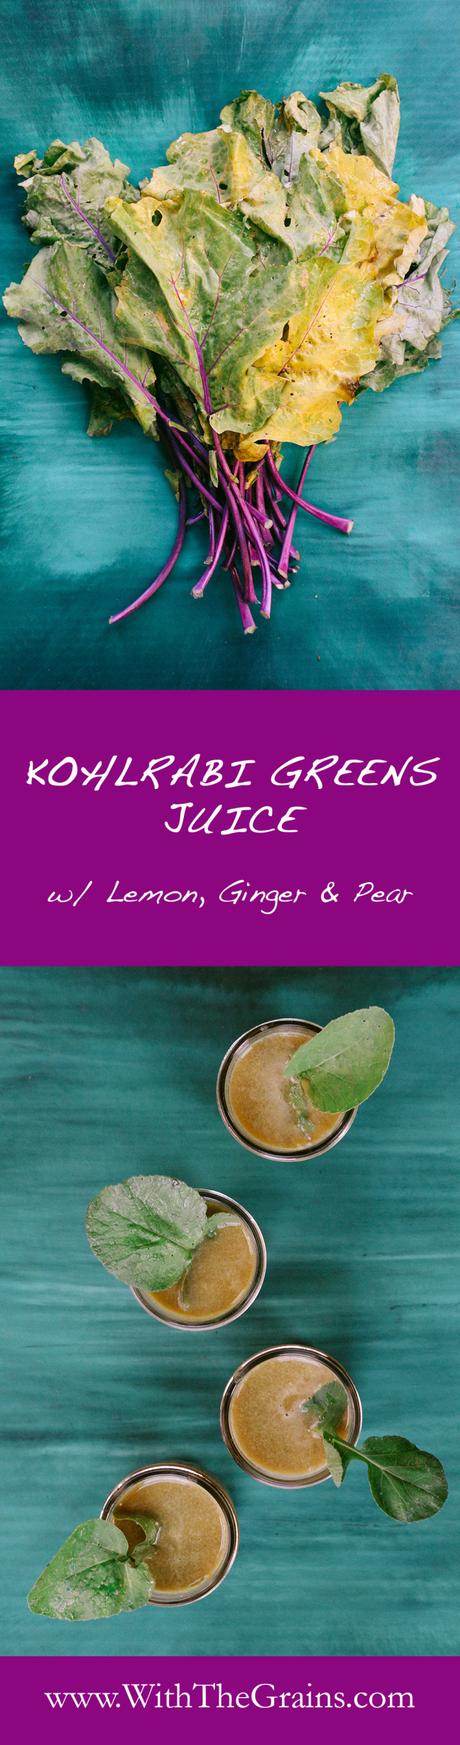 Kohlrabi Greens Juice by With The Grains 01